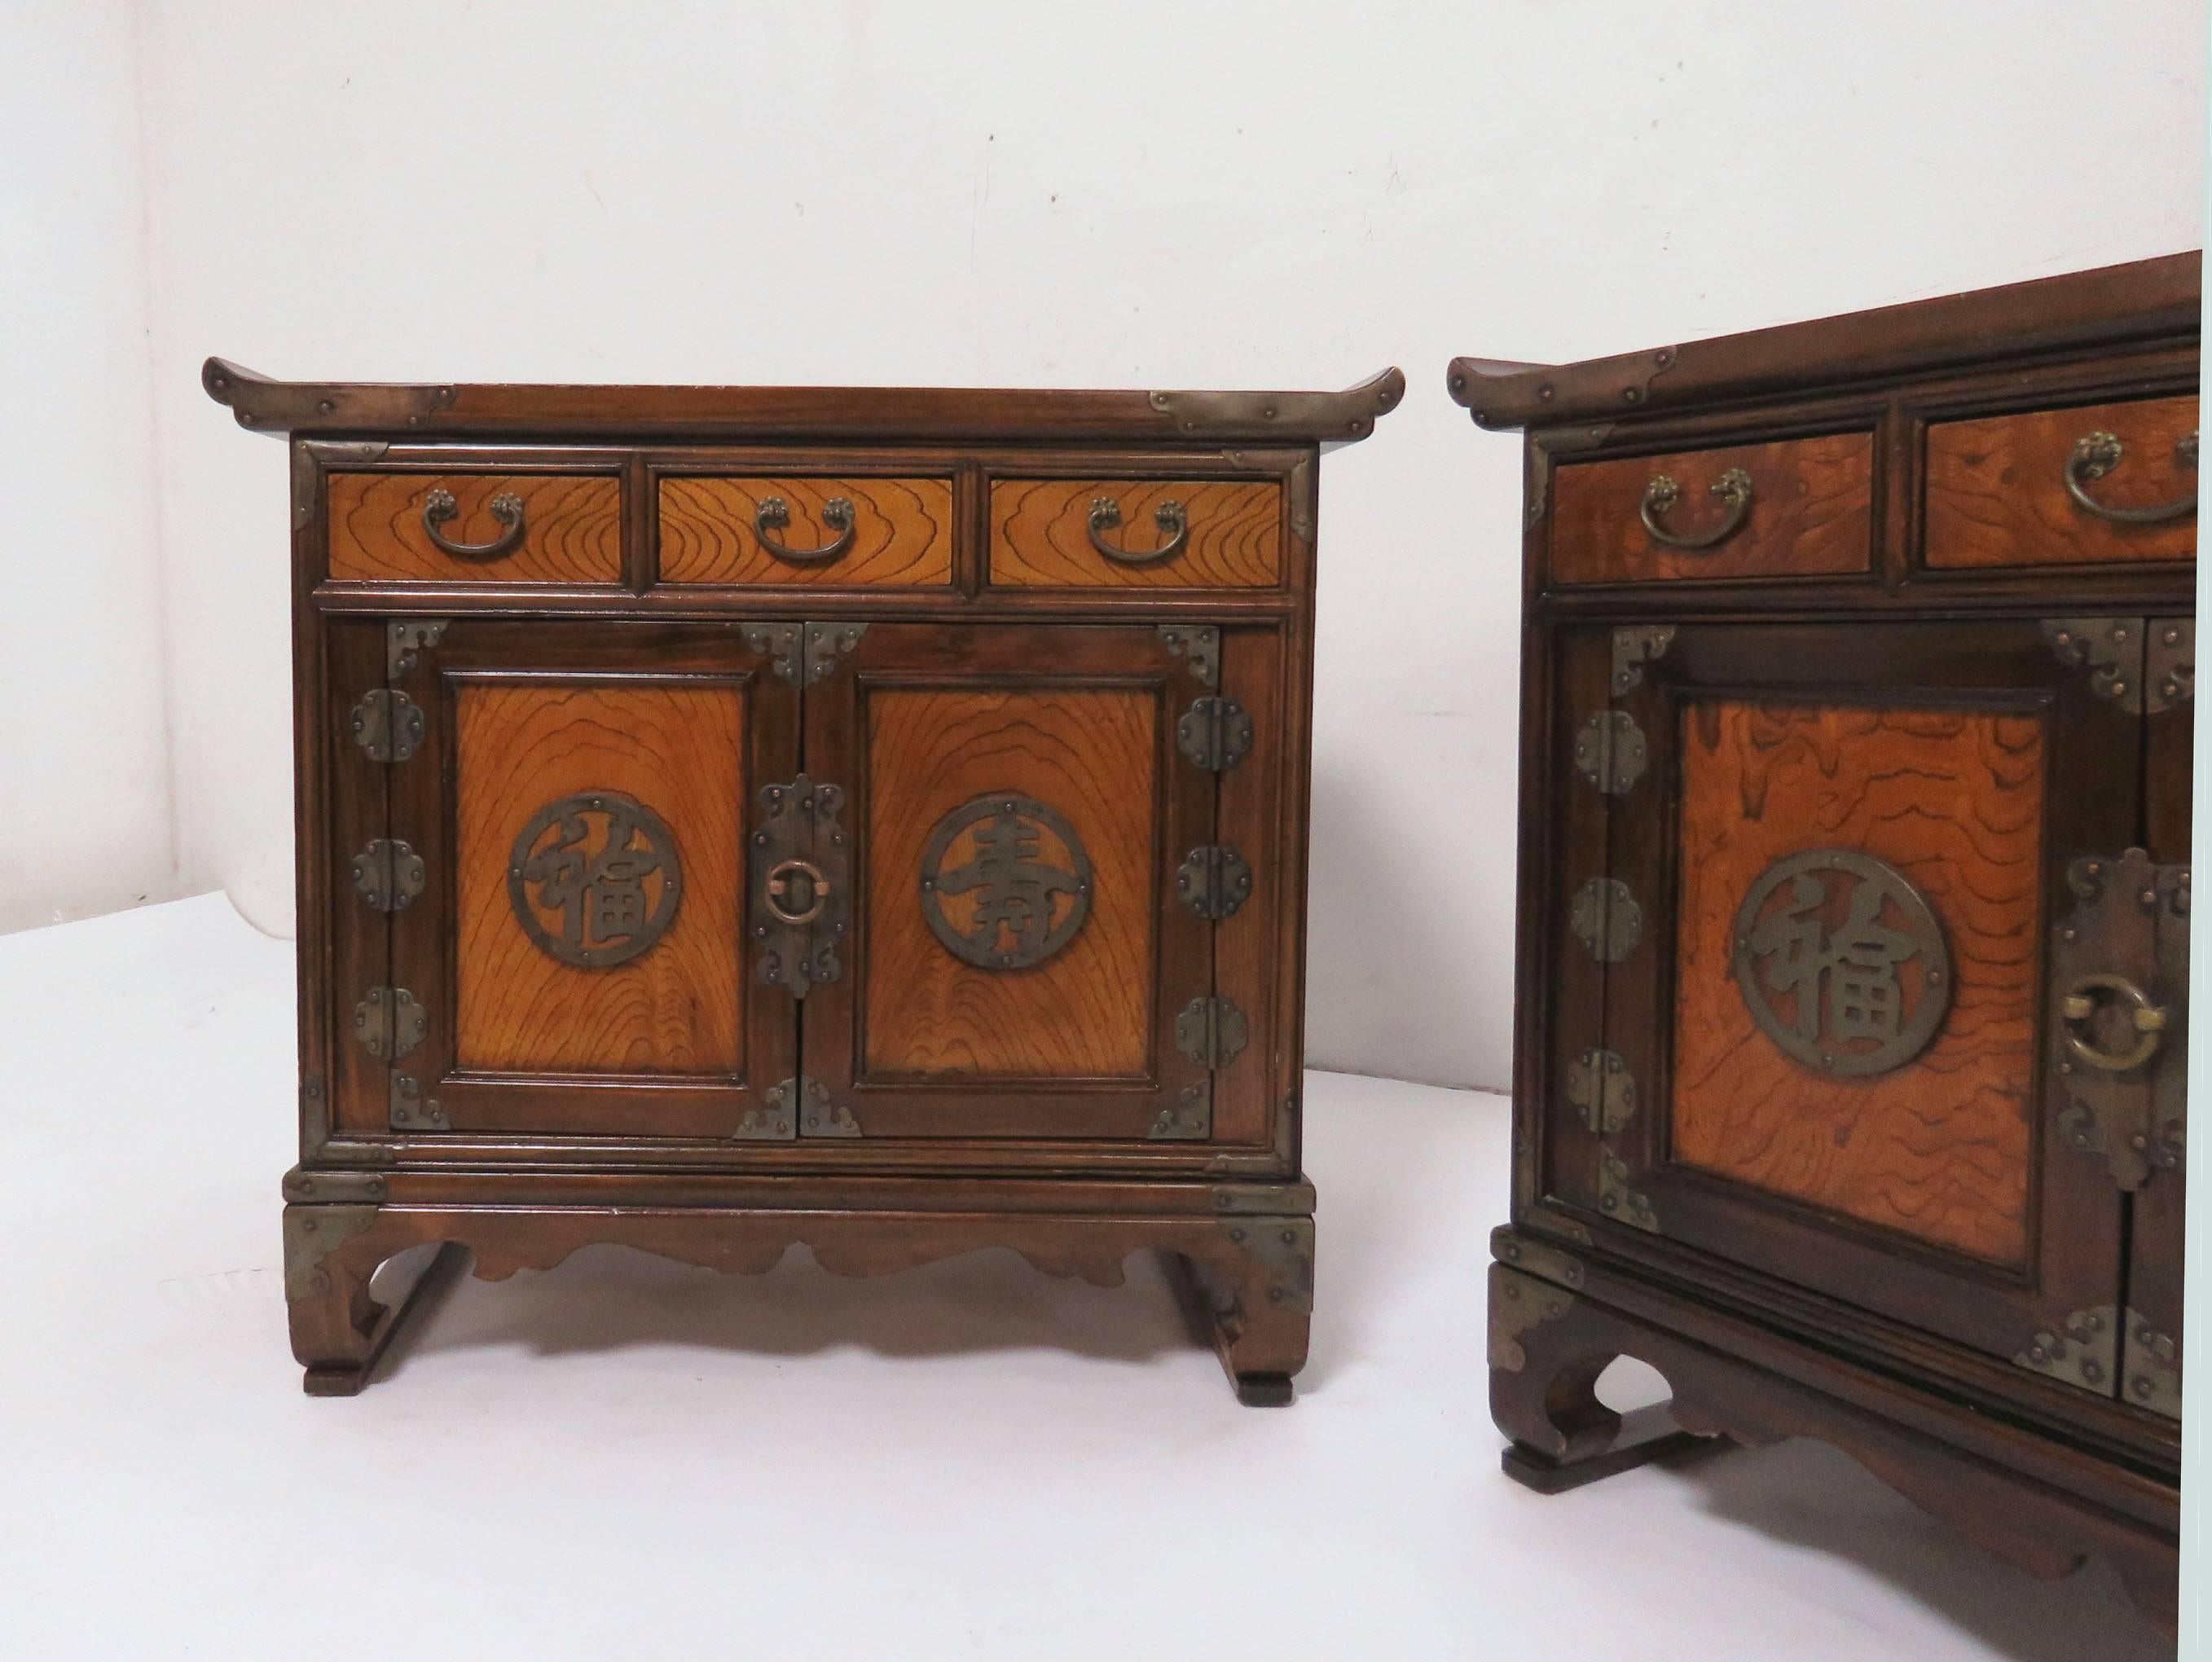 Pair of Korean Bandaji (blanket) chests on stands with intricate brass-work and hardware. 22